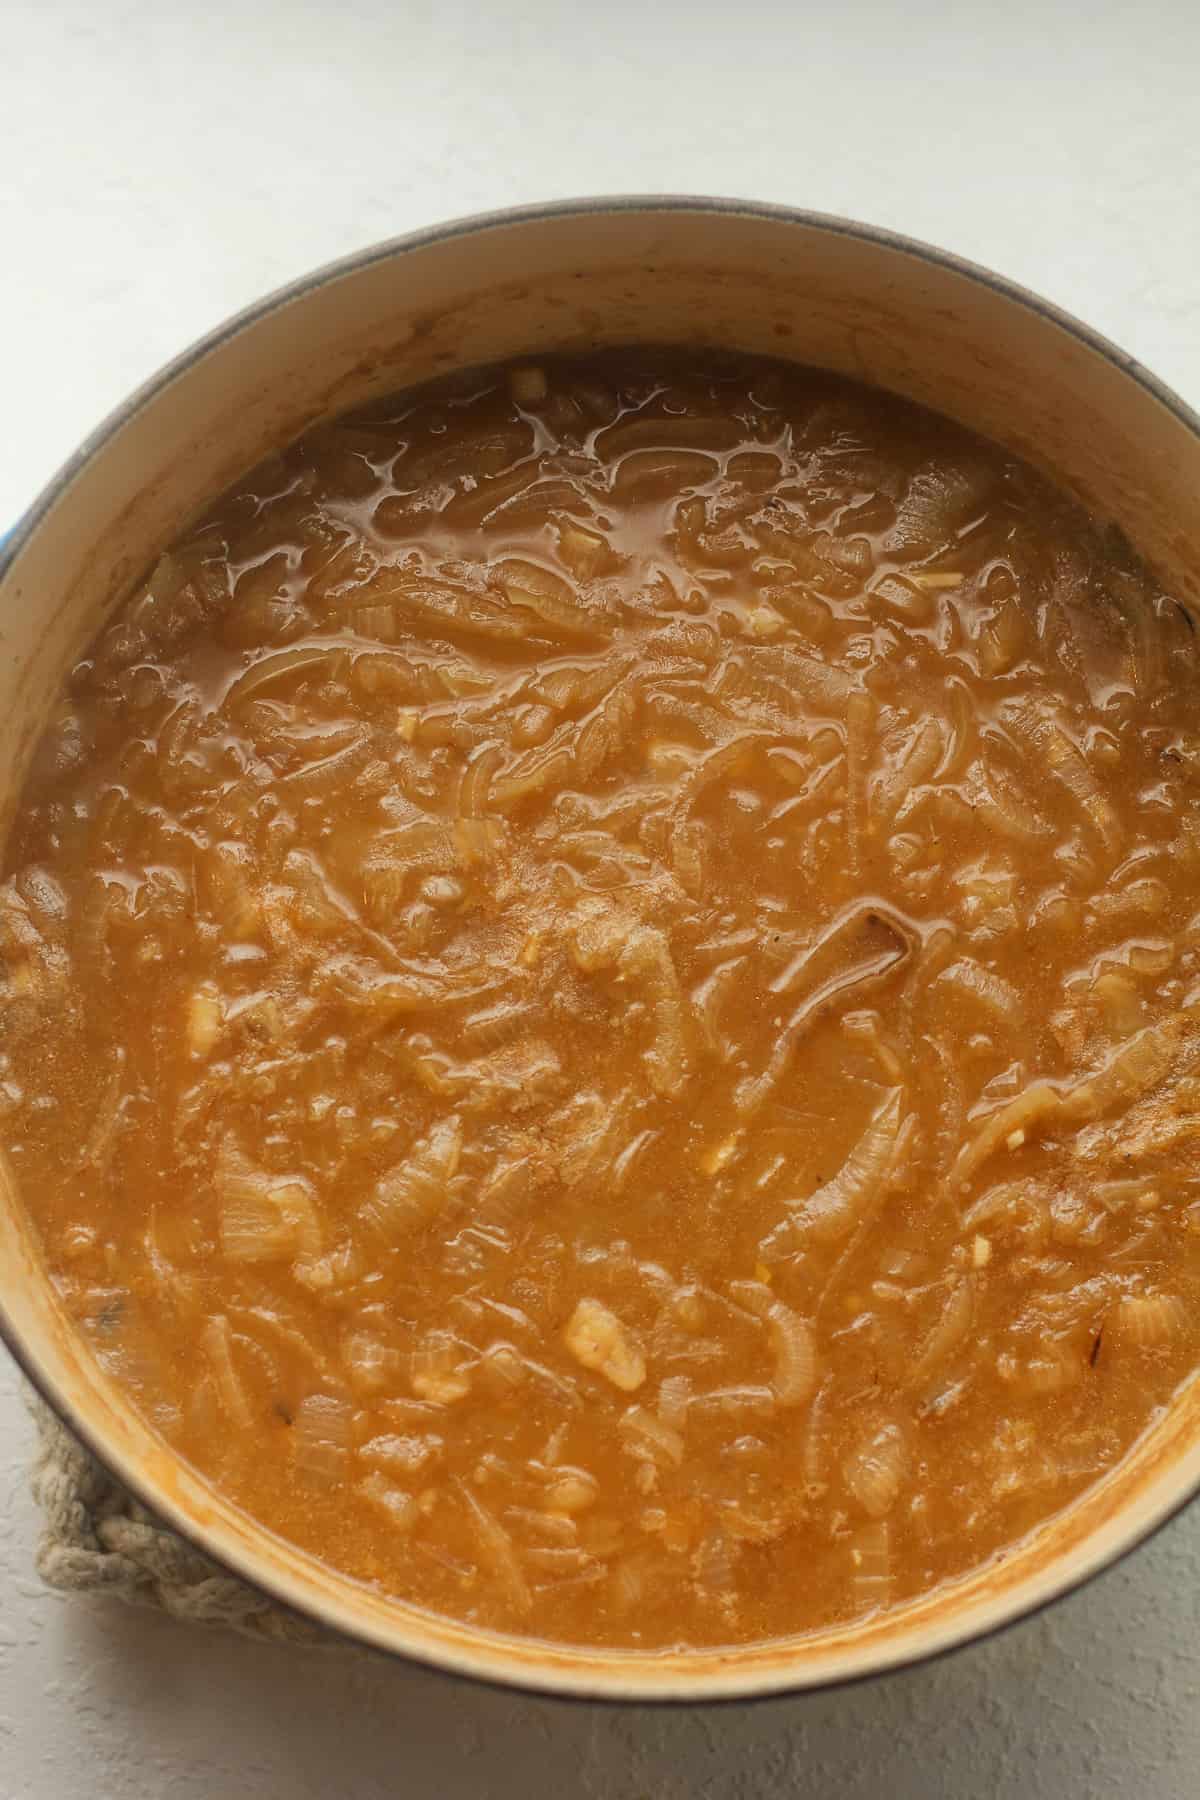 The large pot of French onion soup.